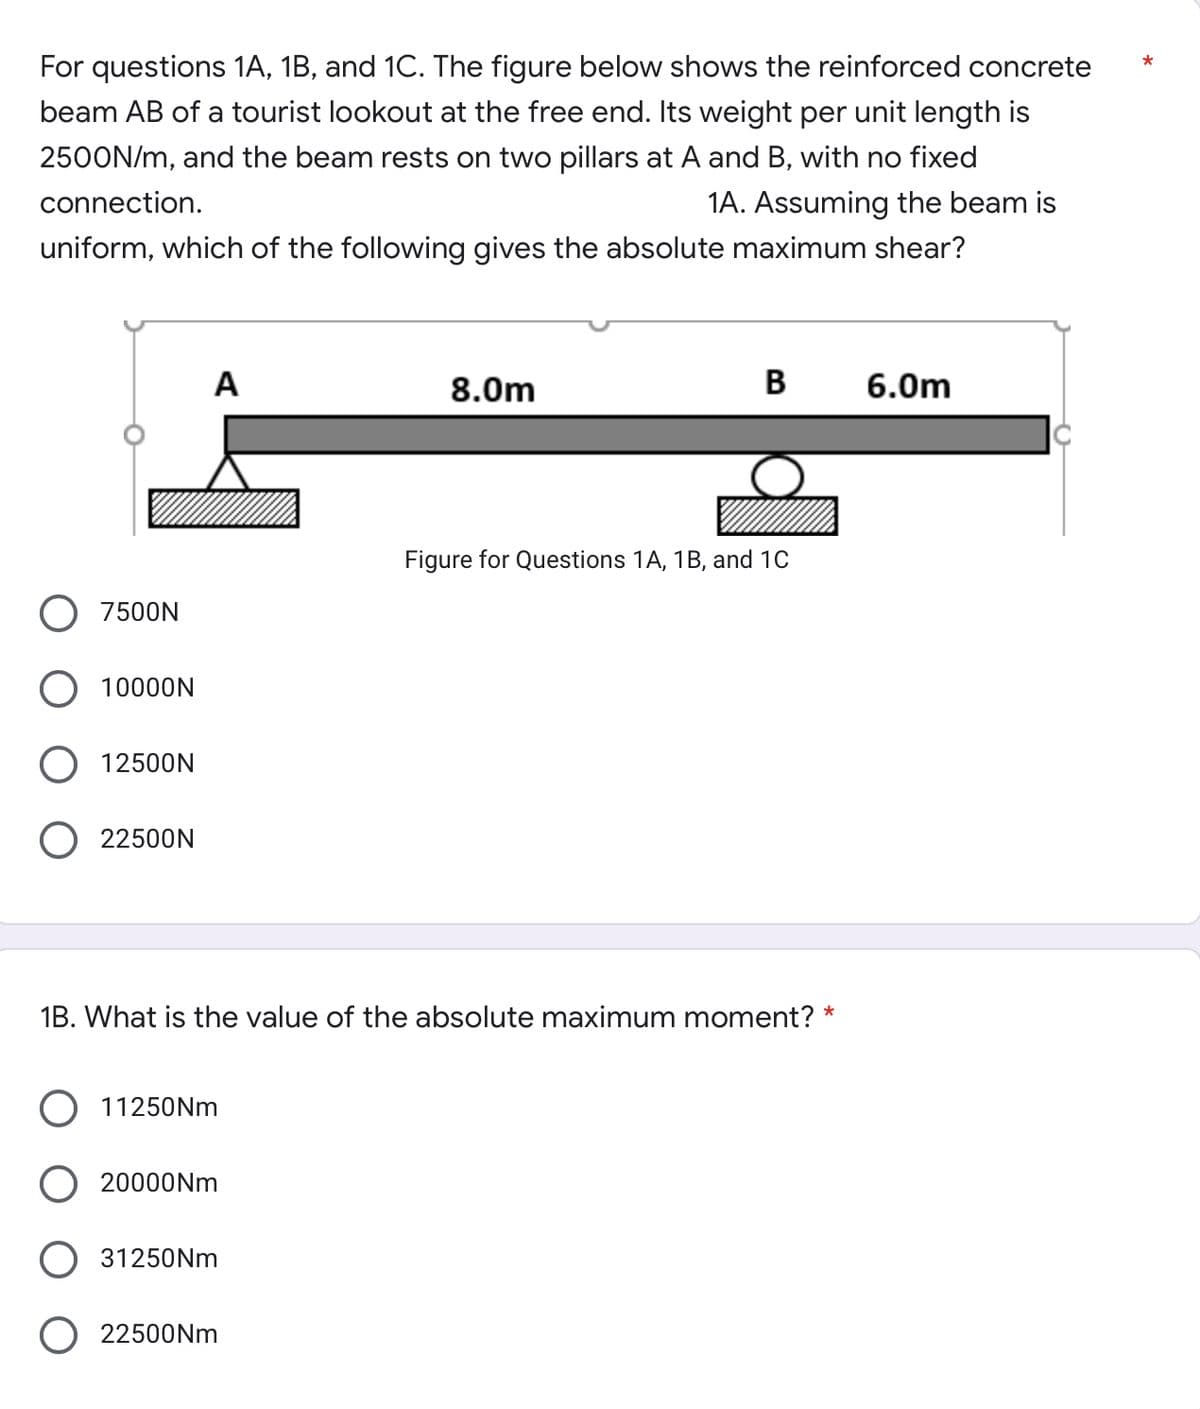 For questions 1A, 1B, and 1C. The figure below shows the reinforced concrete
beam AB of a tourist lookout at the free end. Its weight per unit length is
2500N/m, and the beam rests on two pillars at A and B, with no fixed
connection.
1A. Assuming the beam is
uniform, which of the following gives the absolute maximum shear?
A
8.0m
B 6.0m
Figure for Questions 1A, 1B, and 1C
O 7500N
O 10000N
O 12500N
22500N
1B. What is the value of the absolute maximum moment? *
O 11250Nm
O 20000Nm
31250Nm
22500Nm